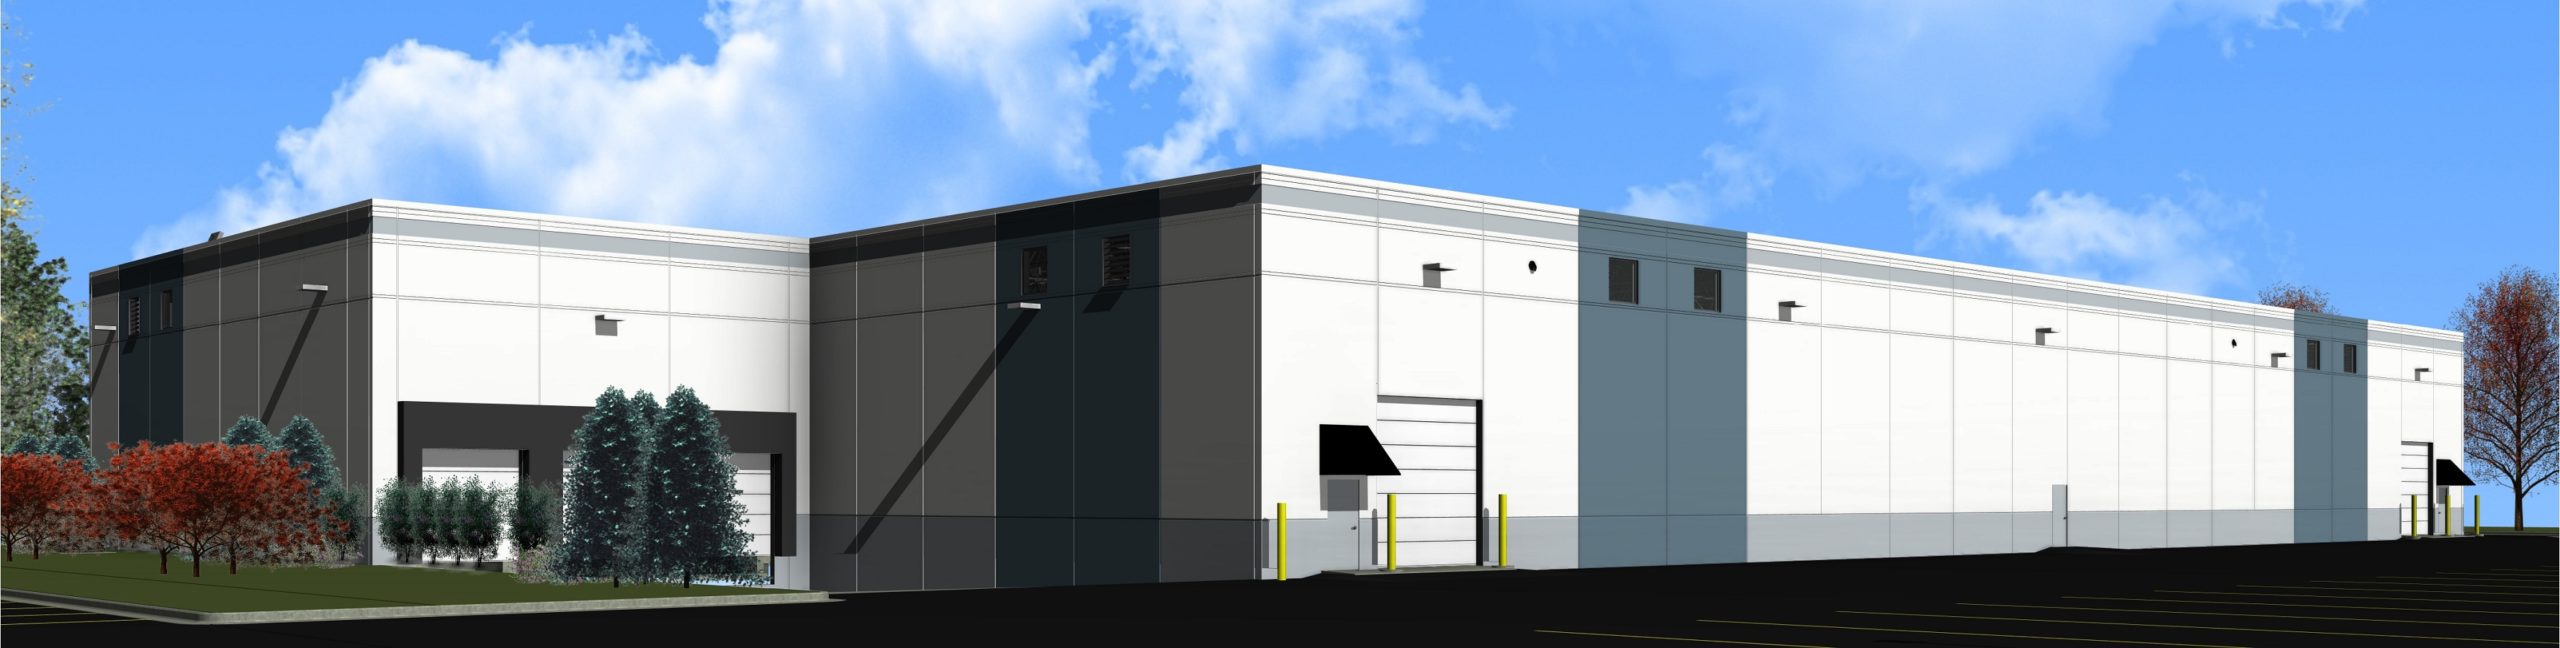 Advantage Moving and Storage Building Design designed by DDCA Architects